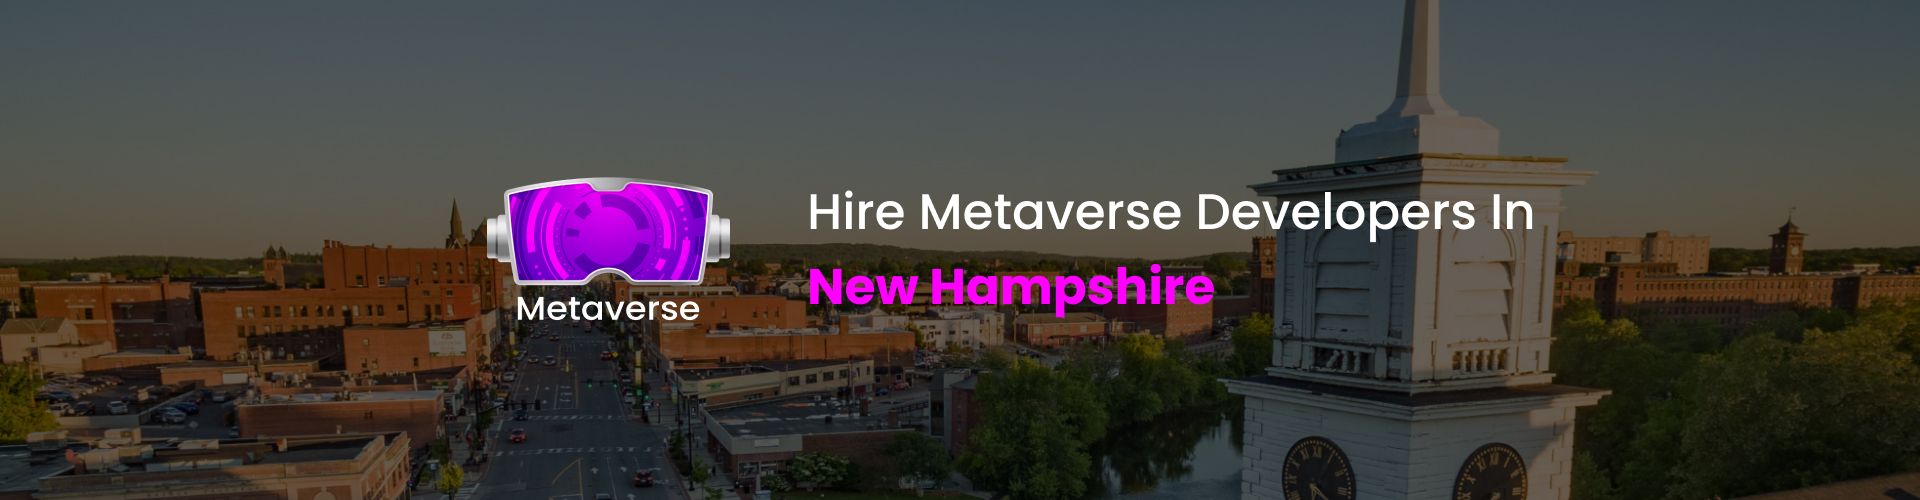 hire metaverse developers in new hampshire